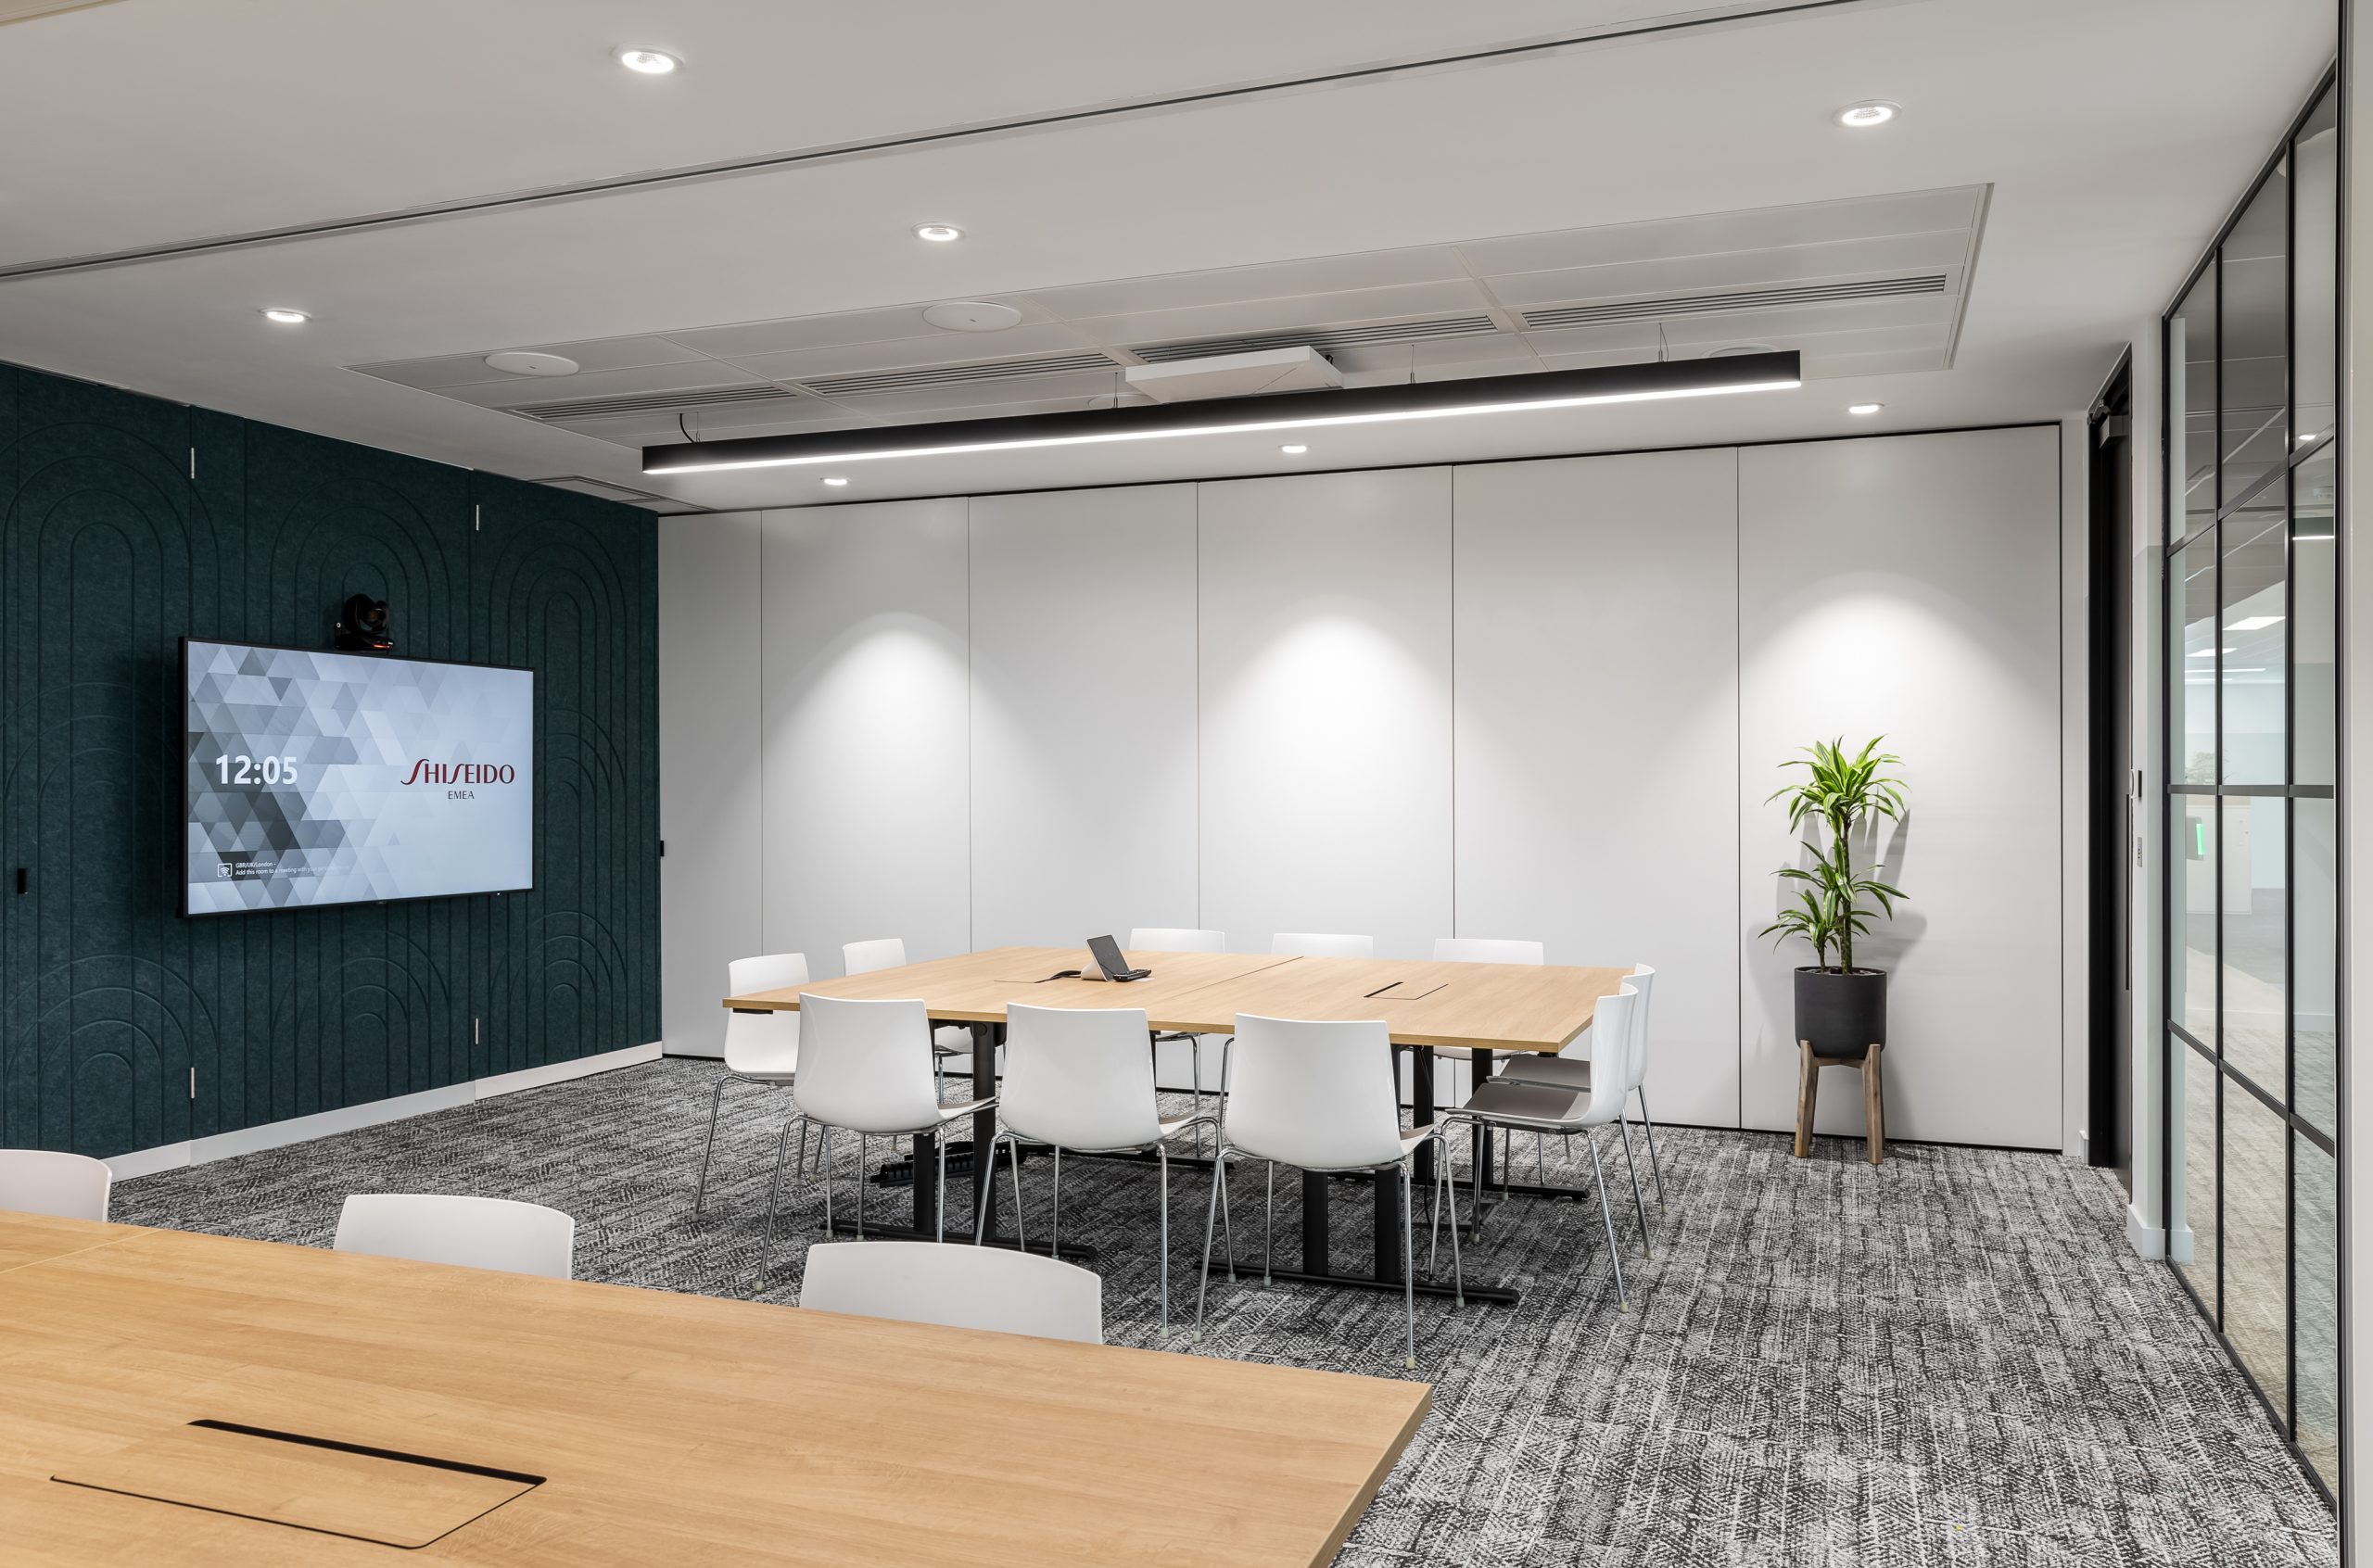 An image showing AV solutions in a meeting room which has been segmented.